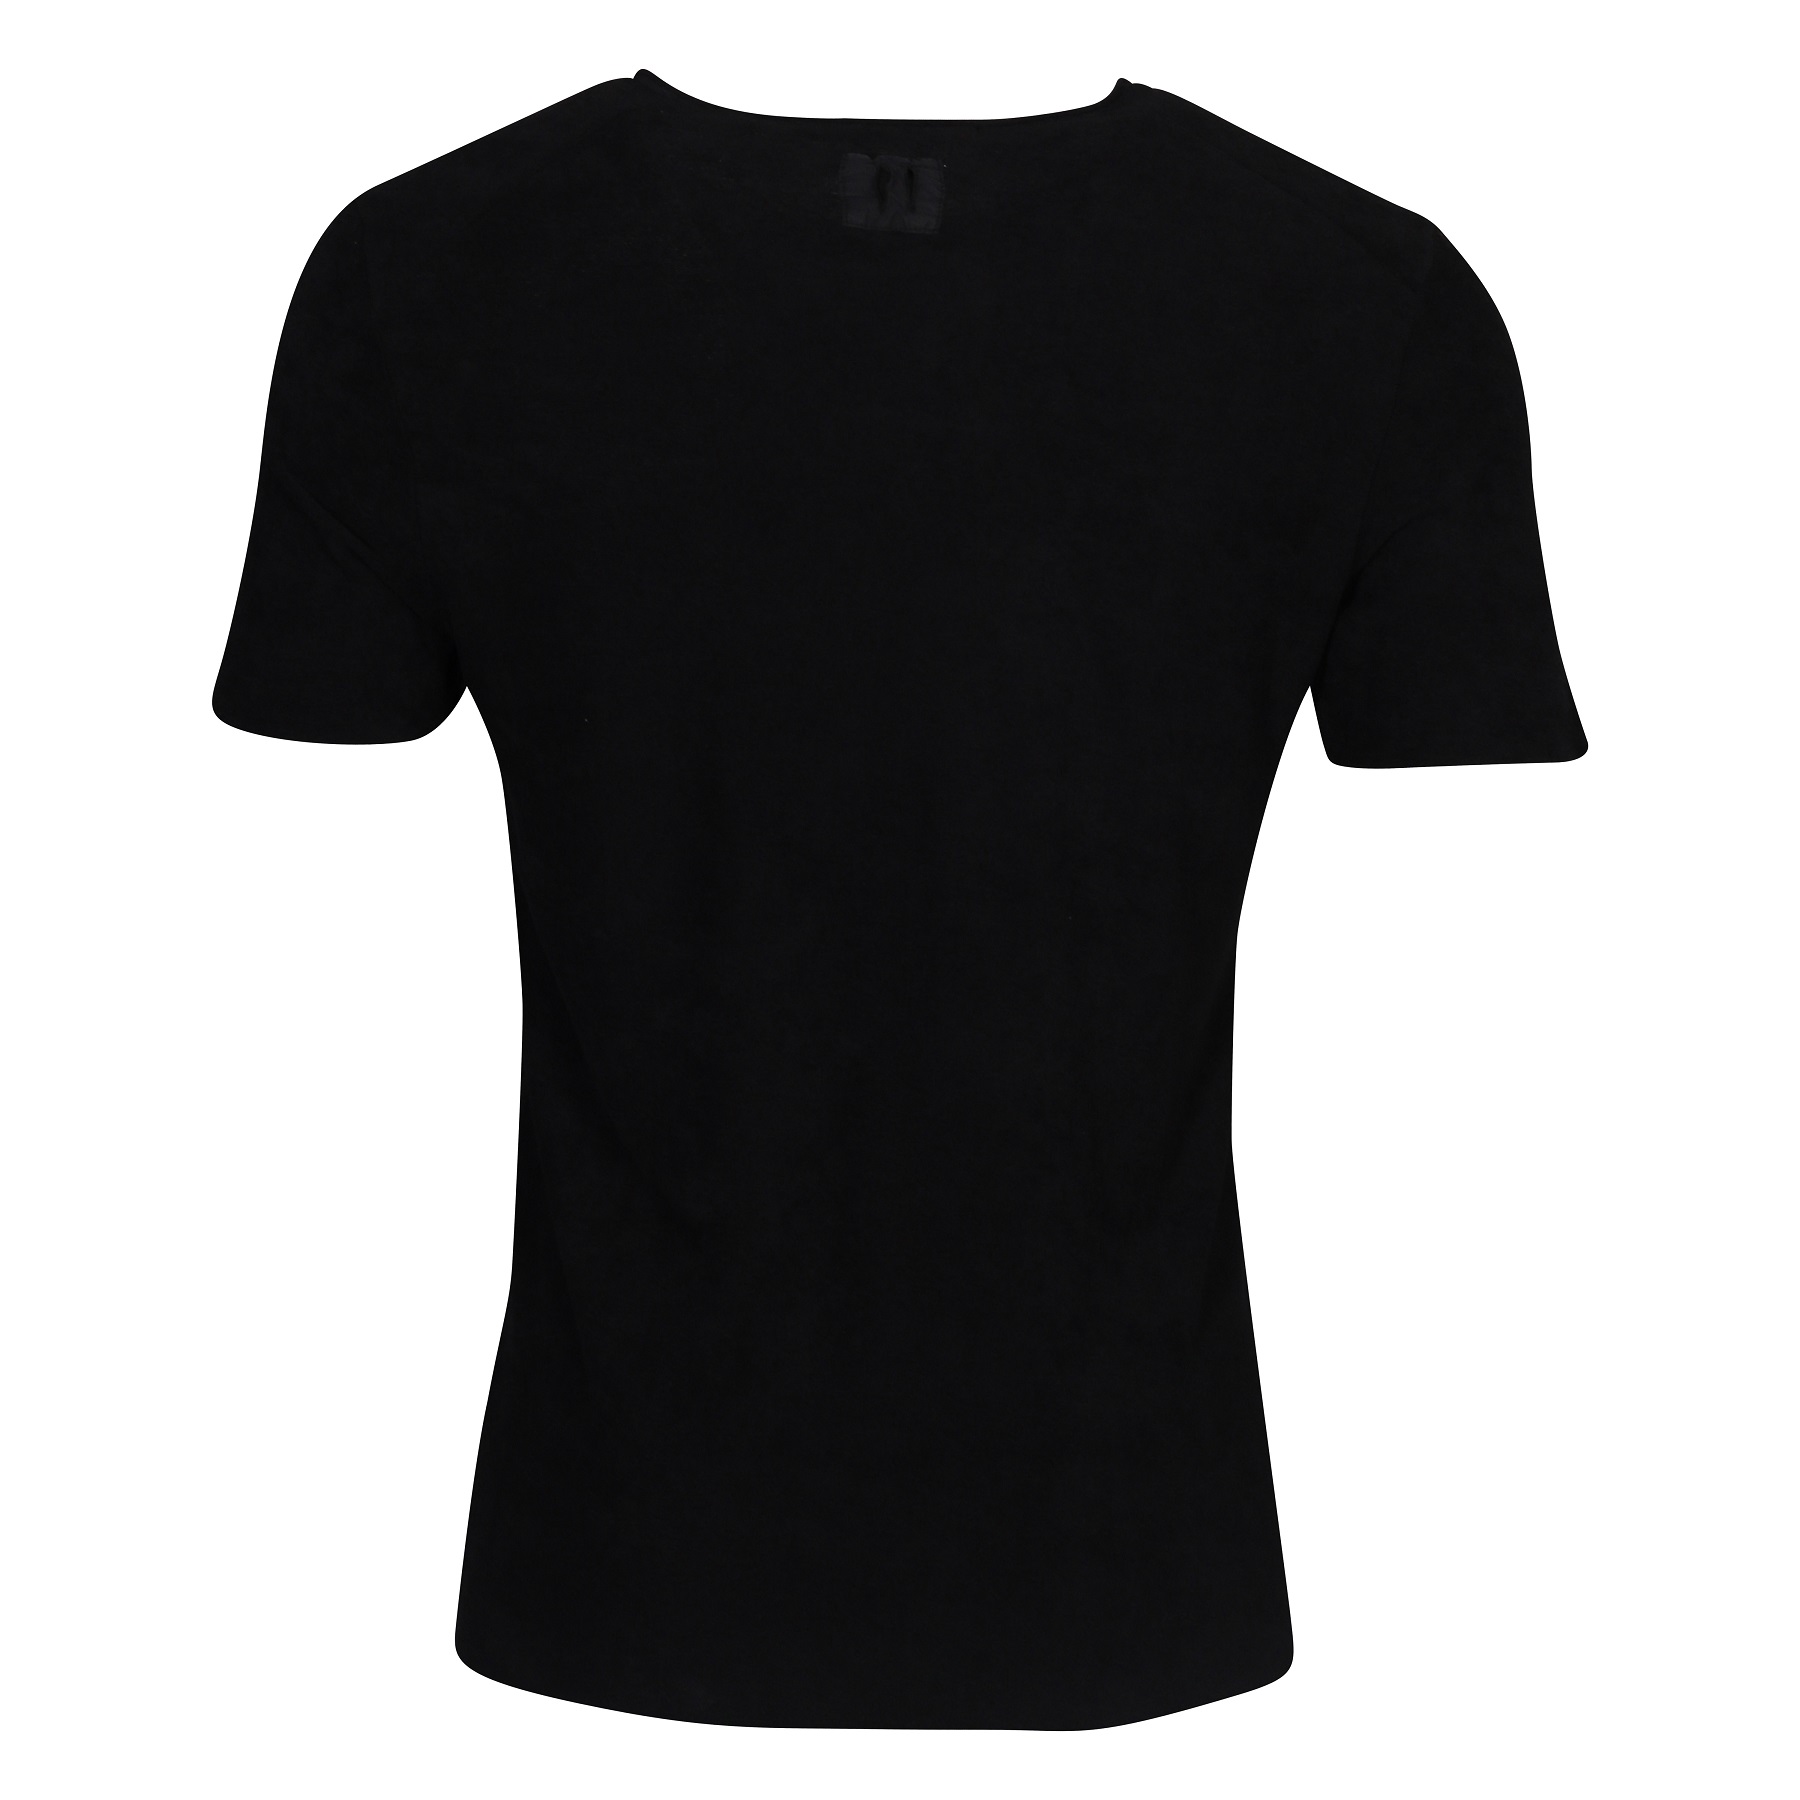 HANNES ROETHER Terry T-Shirt in Black XL